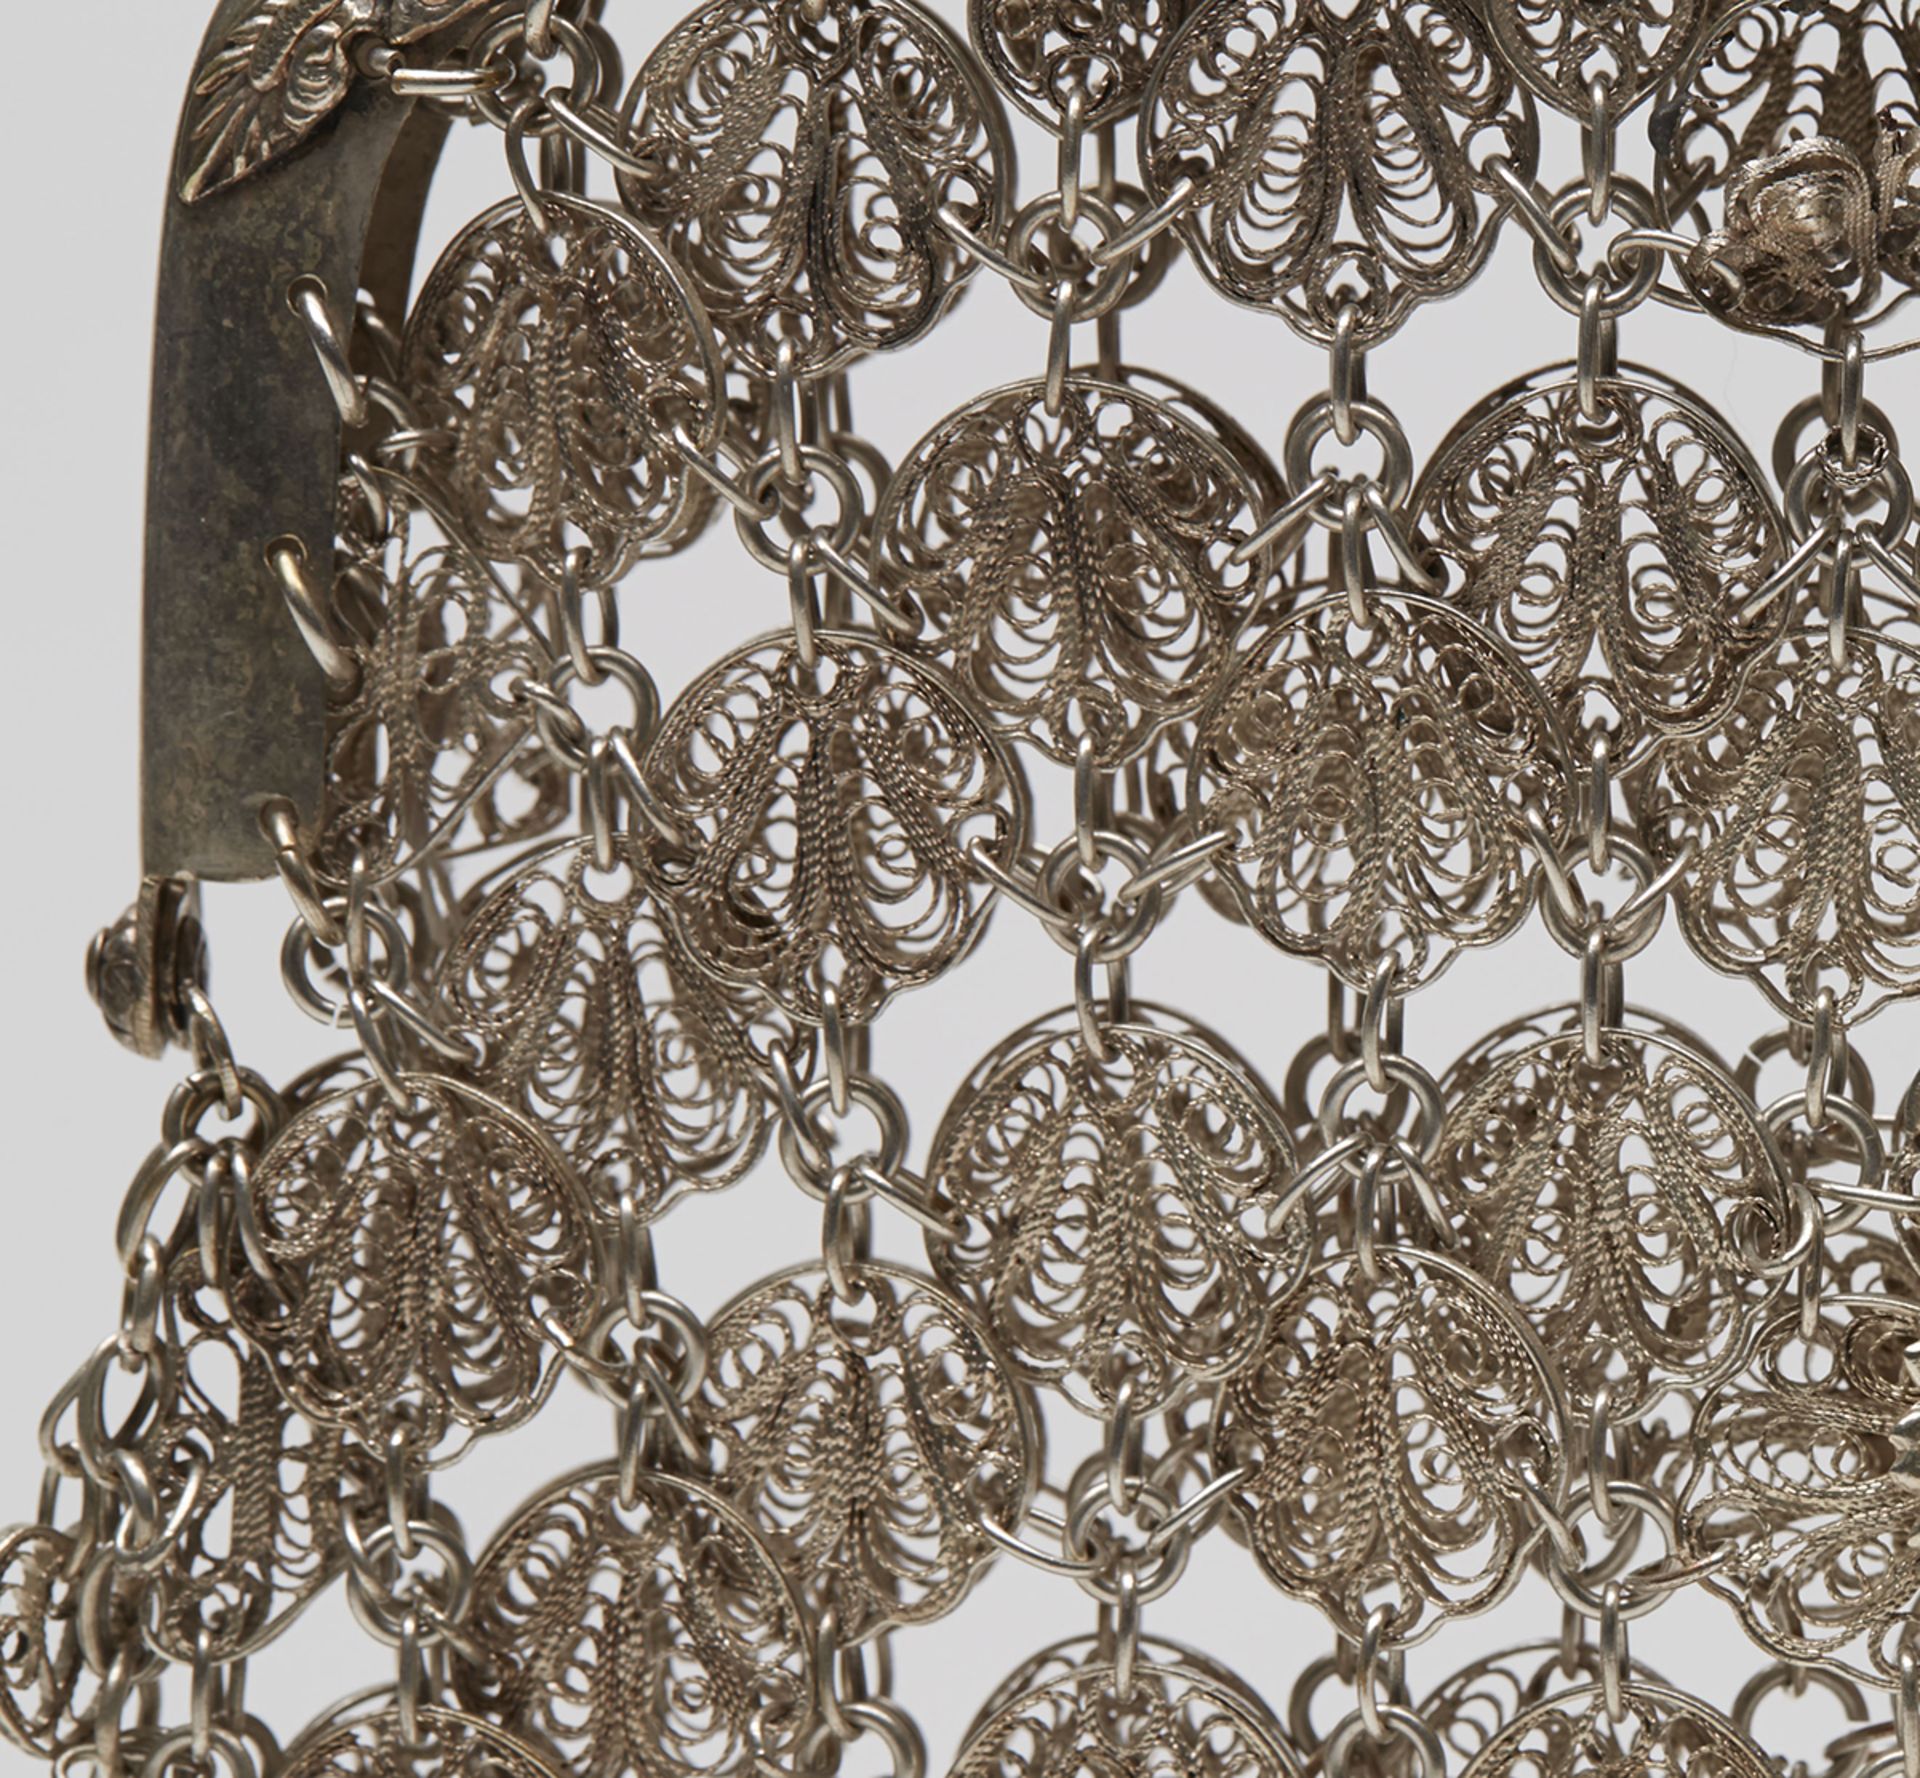 Antique Chinese Heavy Silver Filigree Chain Purse C.1900 - Image 4 of 10